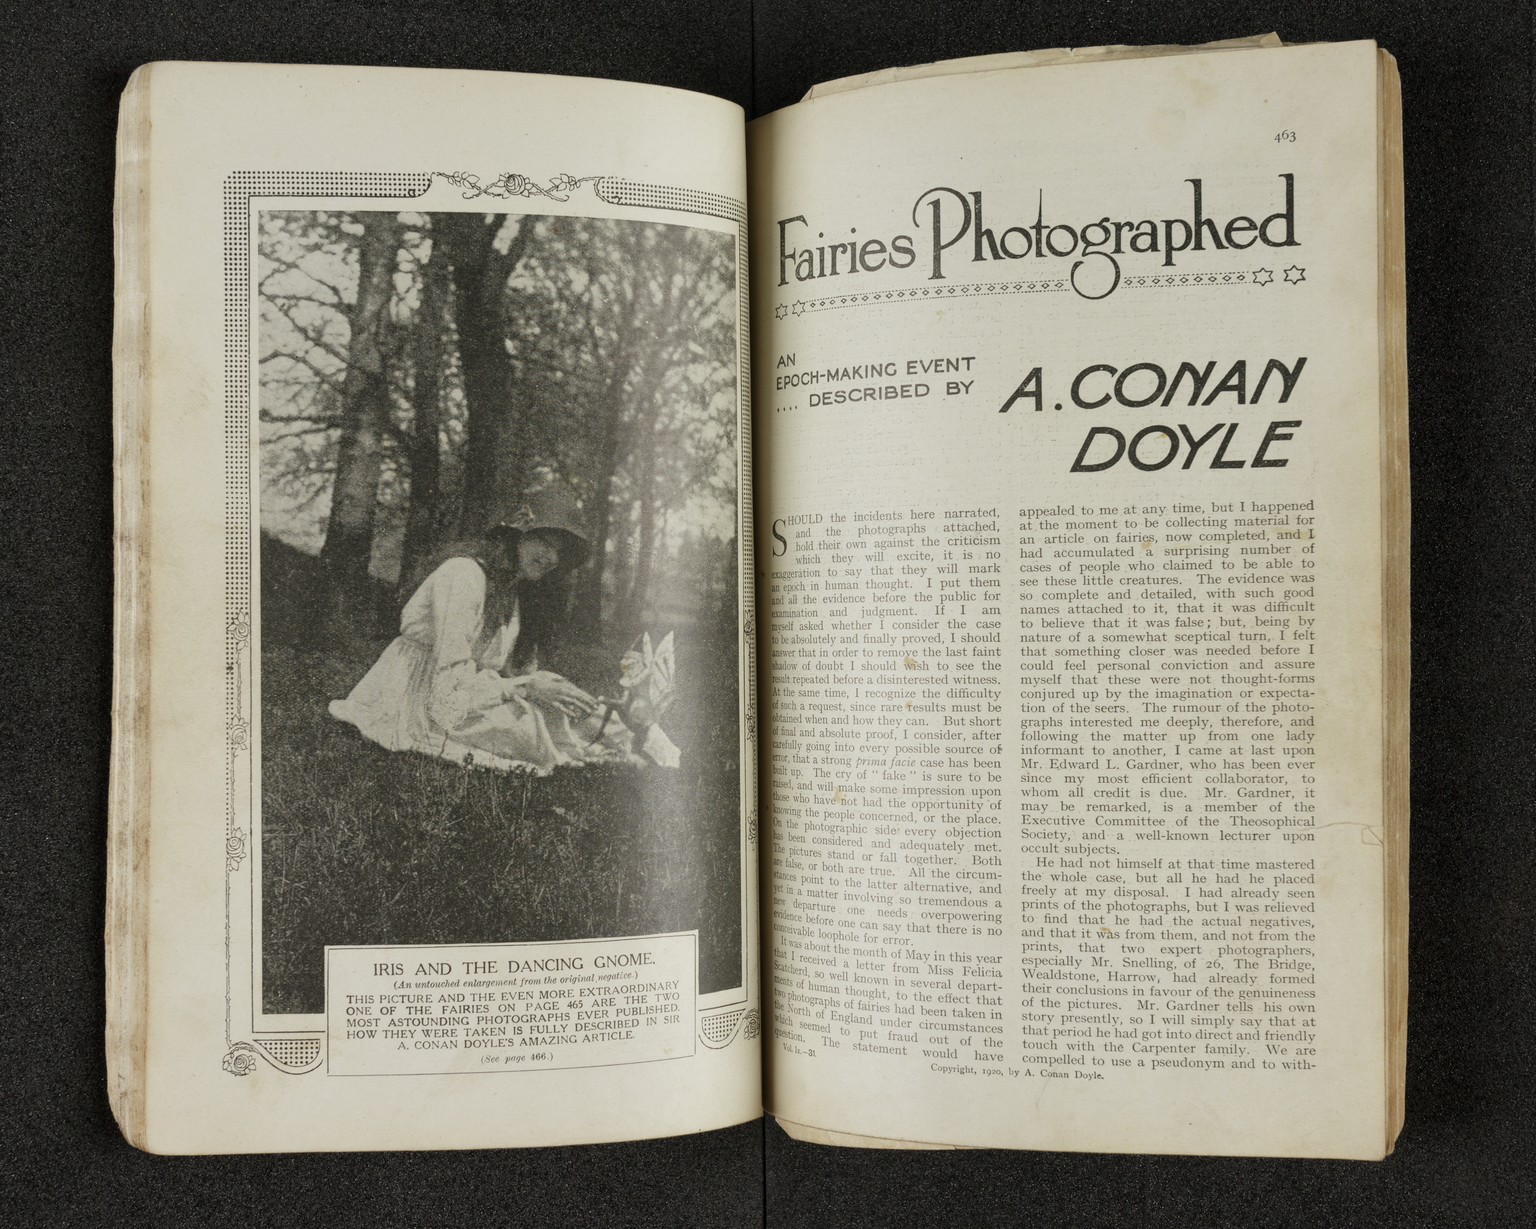 Article about Cottingley Fairies by Arthur Conan Doyle in the Strand magazine